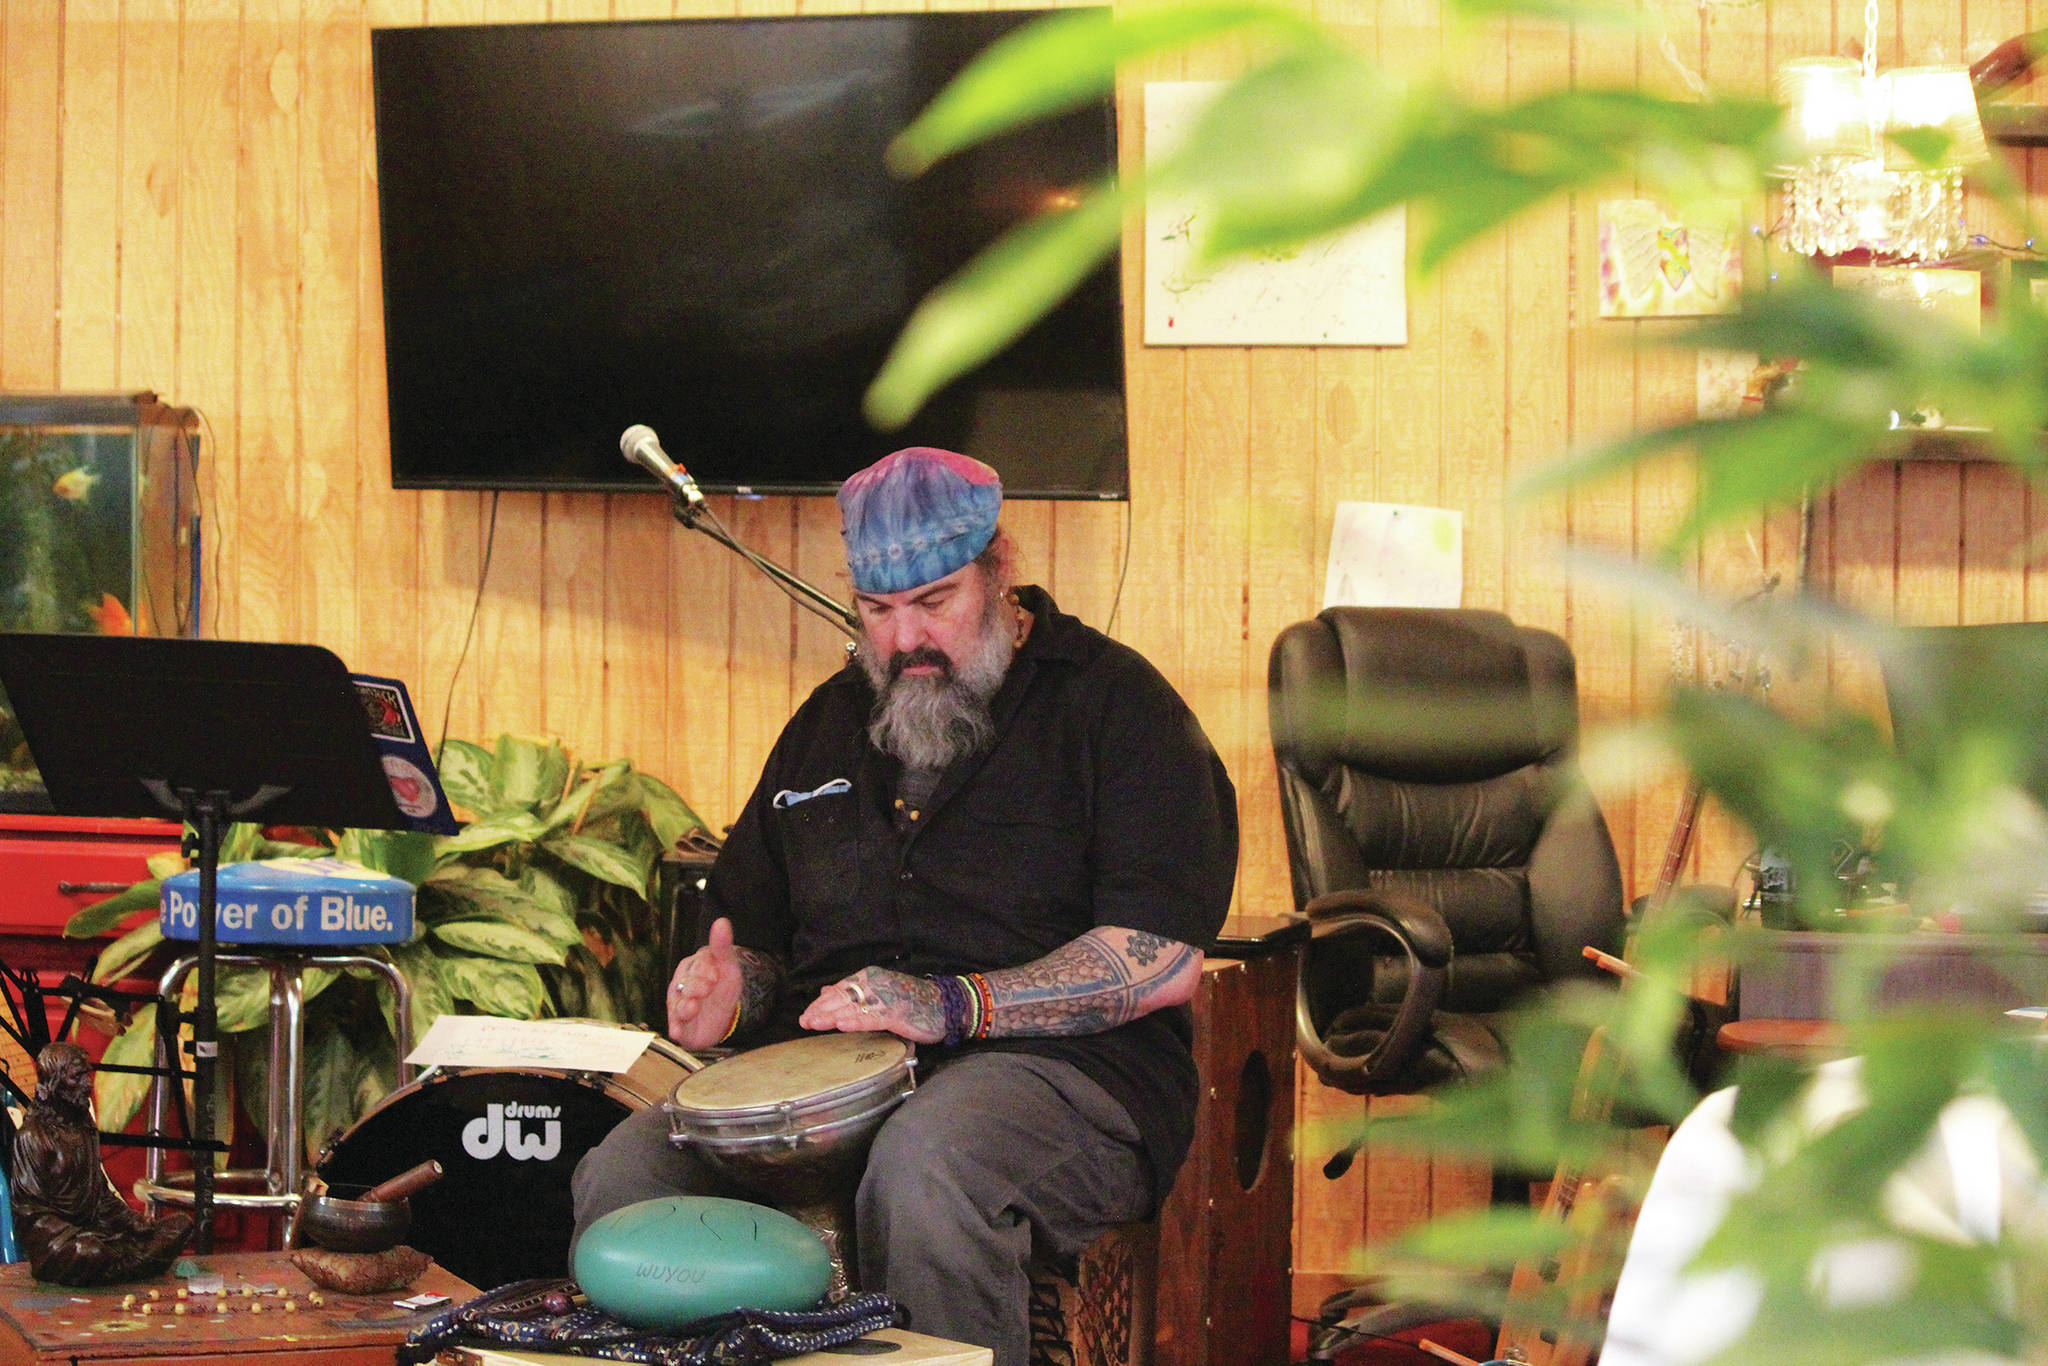 Darren Williams, owner of the Plant Man, plays a drum in his newly expanded space in the Wildberry Building on Pioneer Avenue on Feb. 19, 2021 in Homer, Alaska. (Photo by Megan Pacer/Homer News)